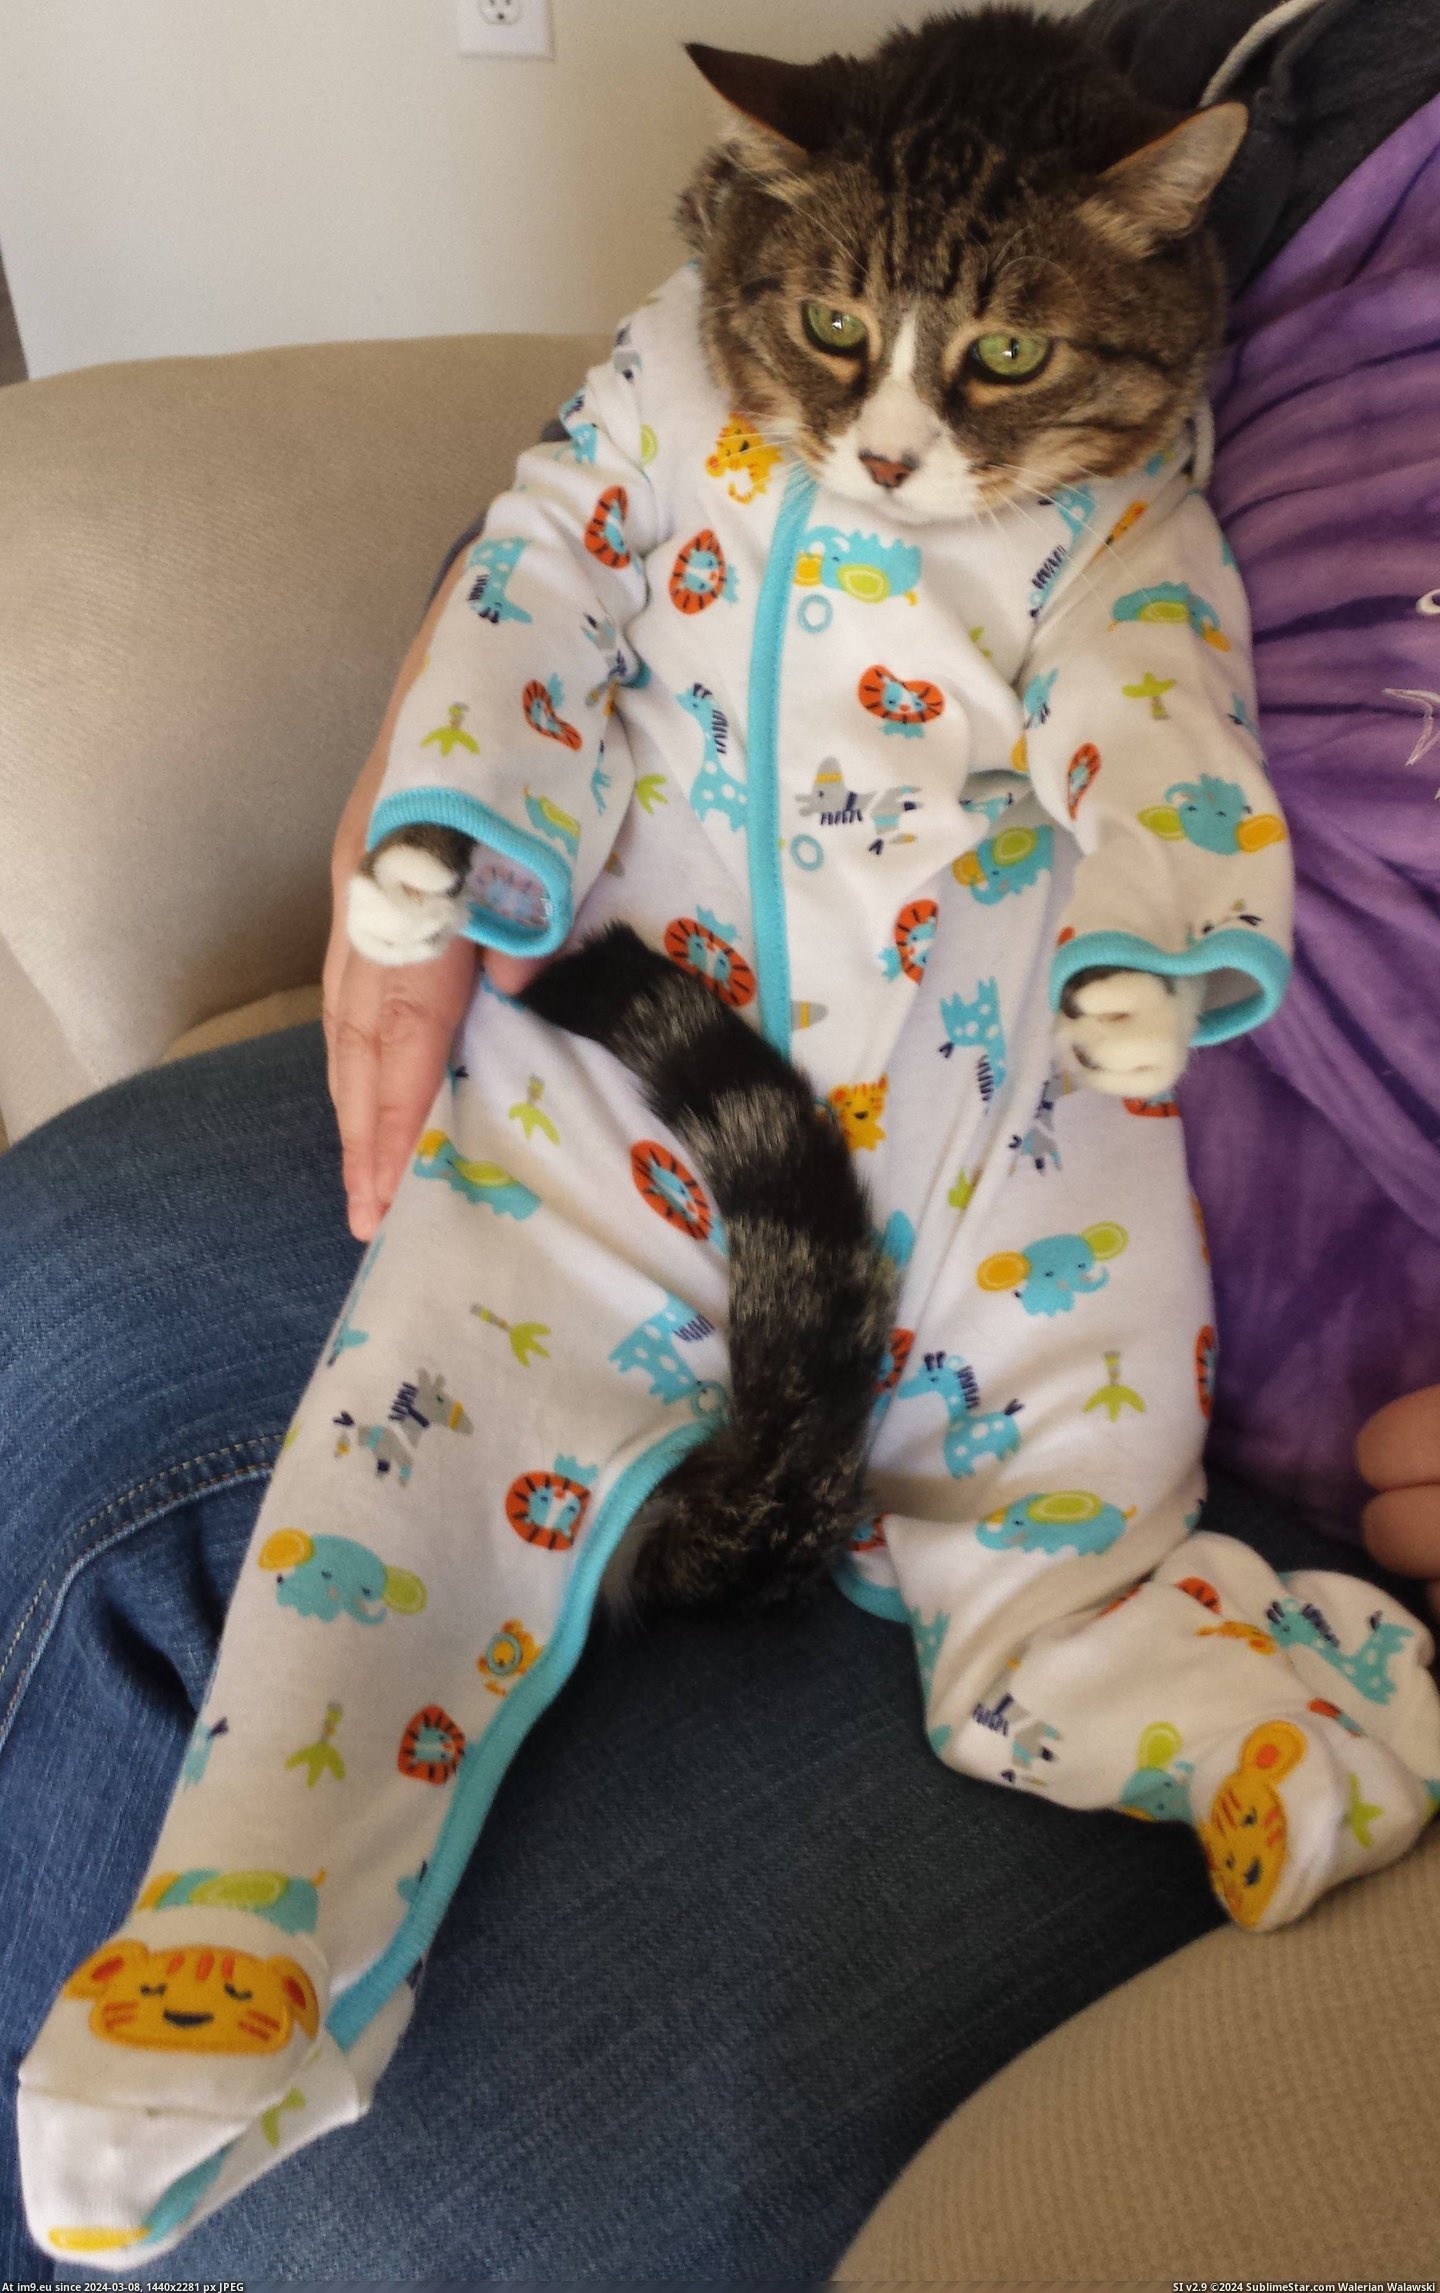 #Was #Cat #Amused #Onesie #Wife #Wanted [Aww] My wife wanted to put our cat in a onesie. He was not amused... Pic. (Изображение из альбом My r/AWW favs))